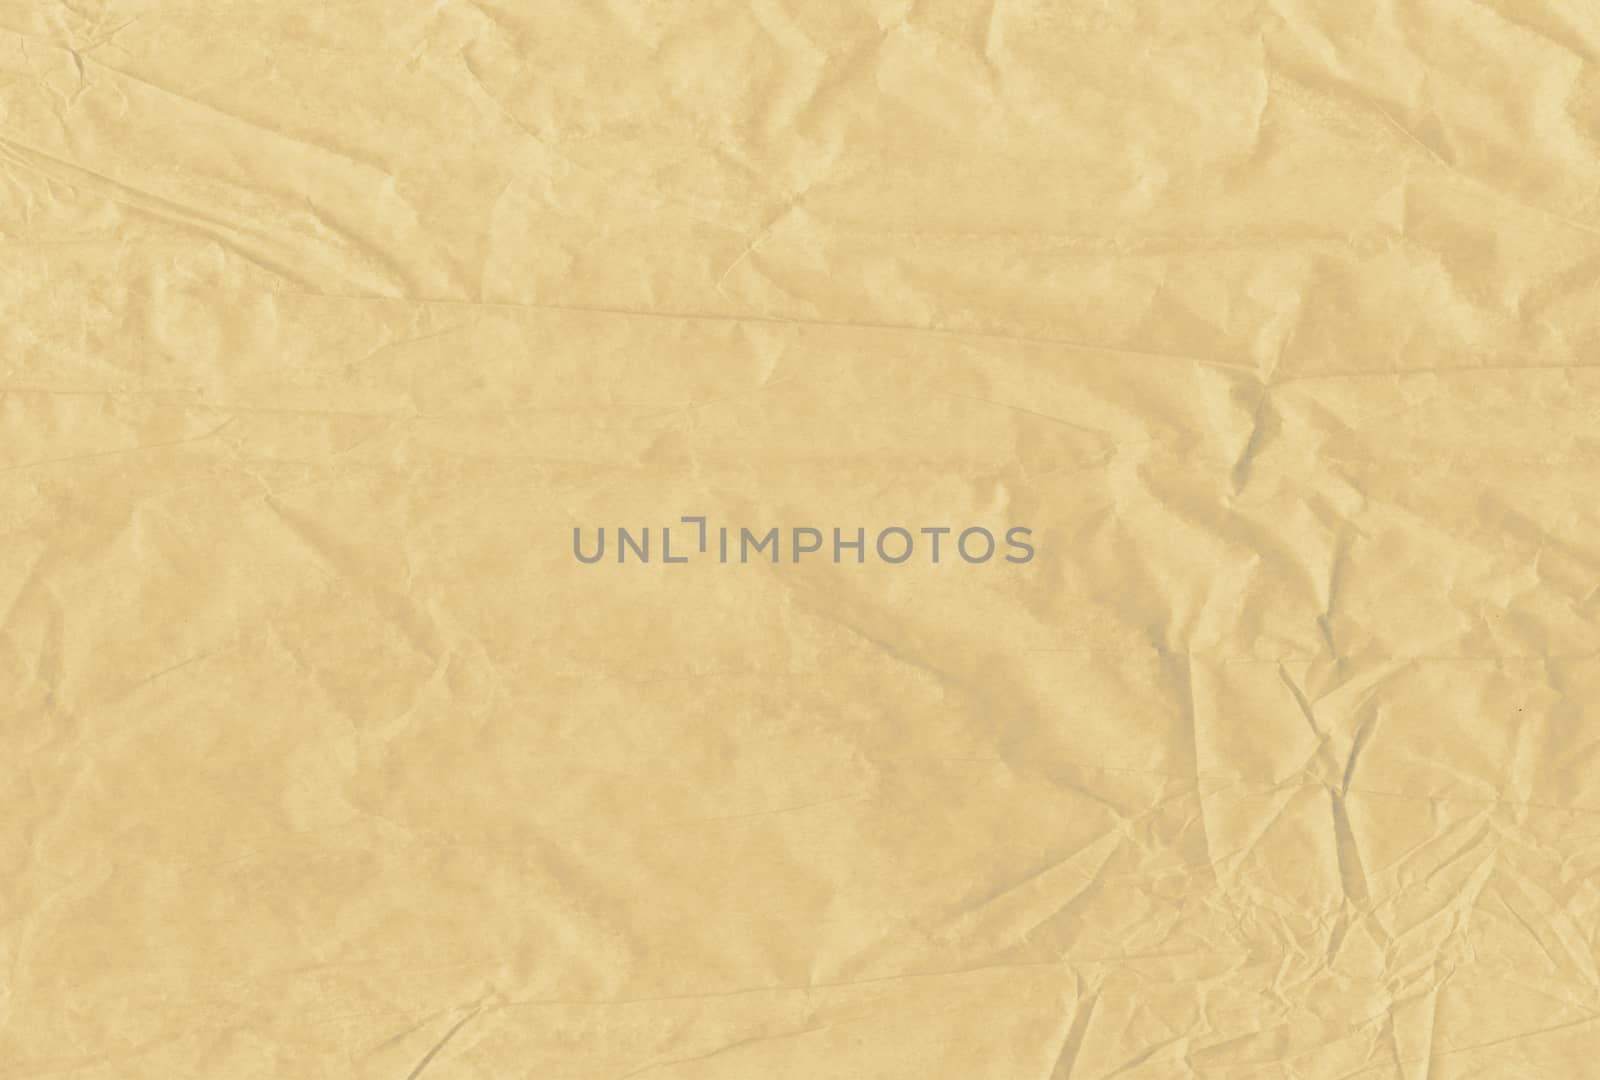 The light brown blank crumpled and grungy textured paper background